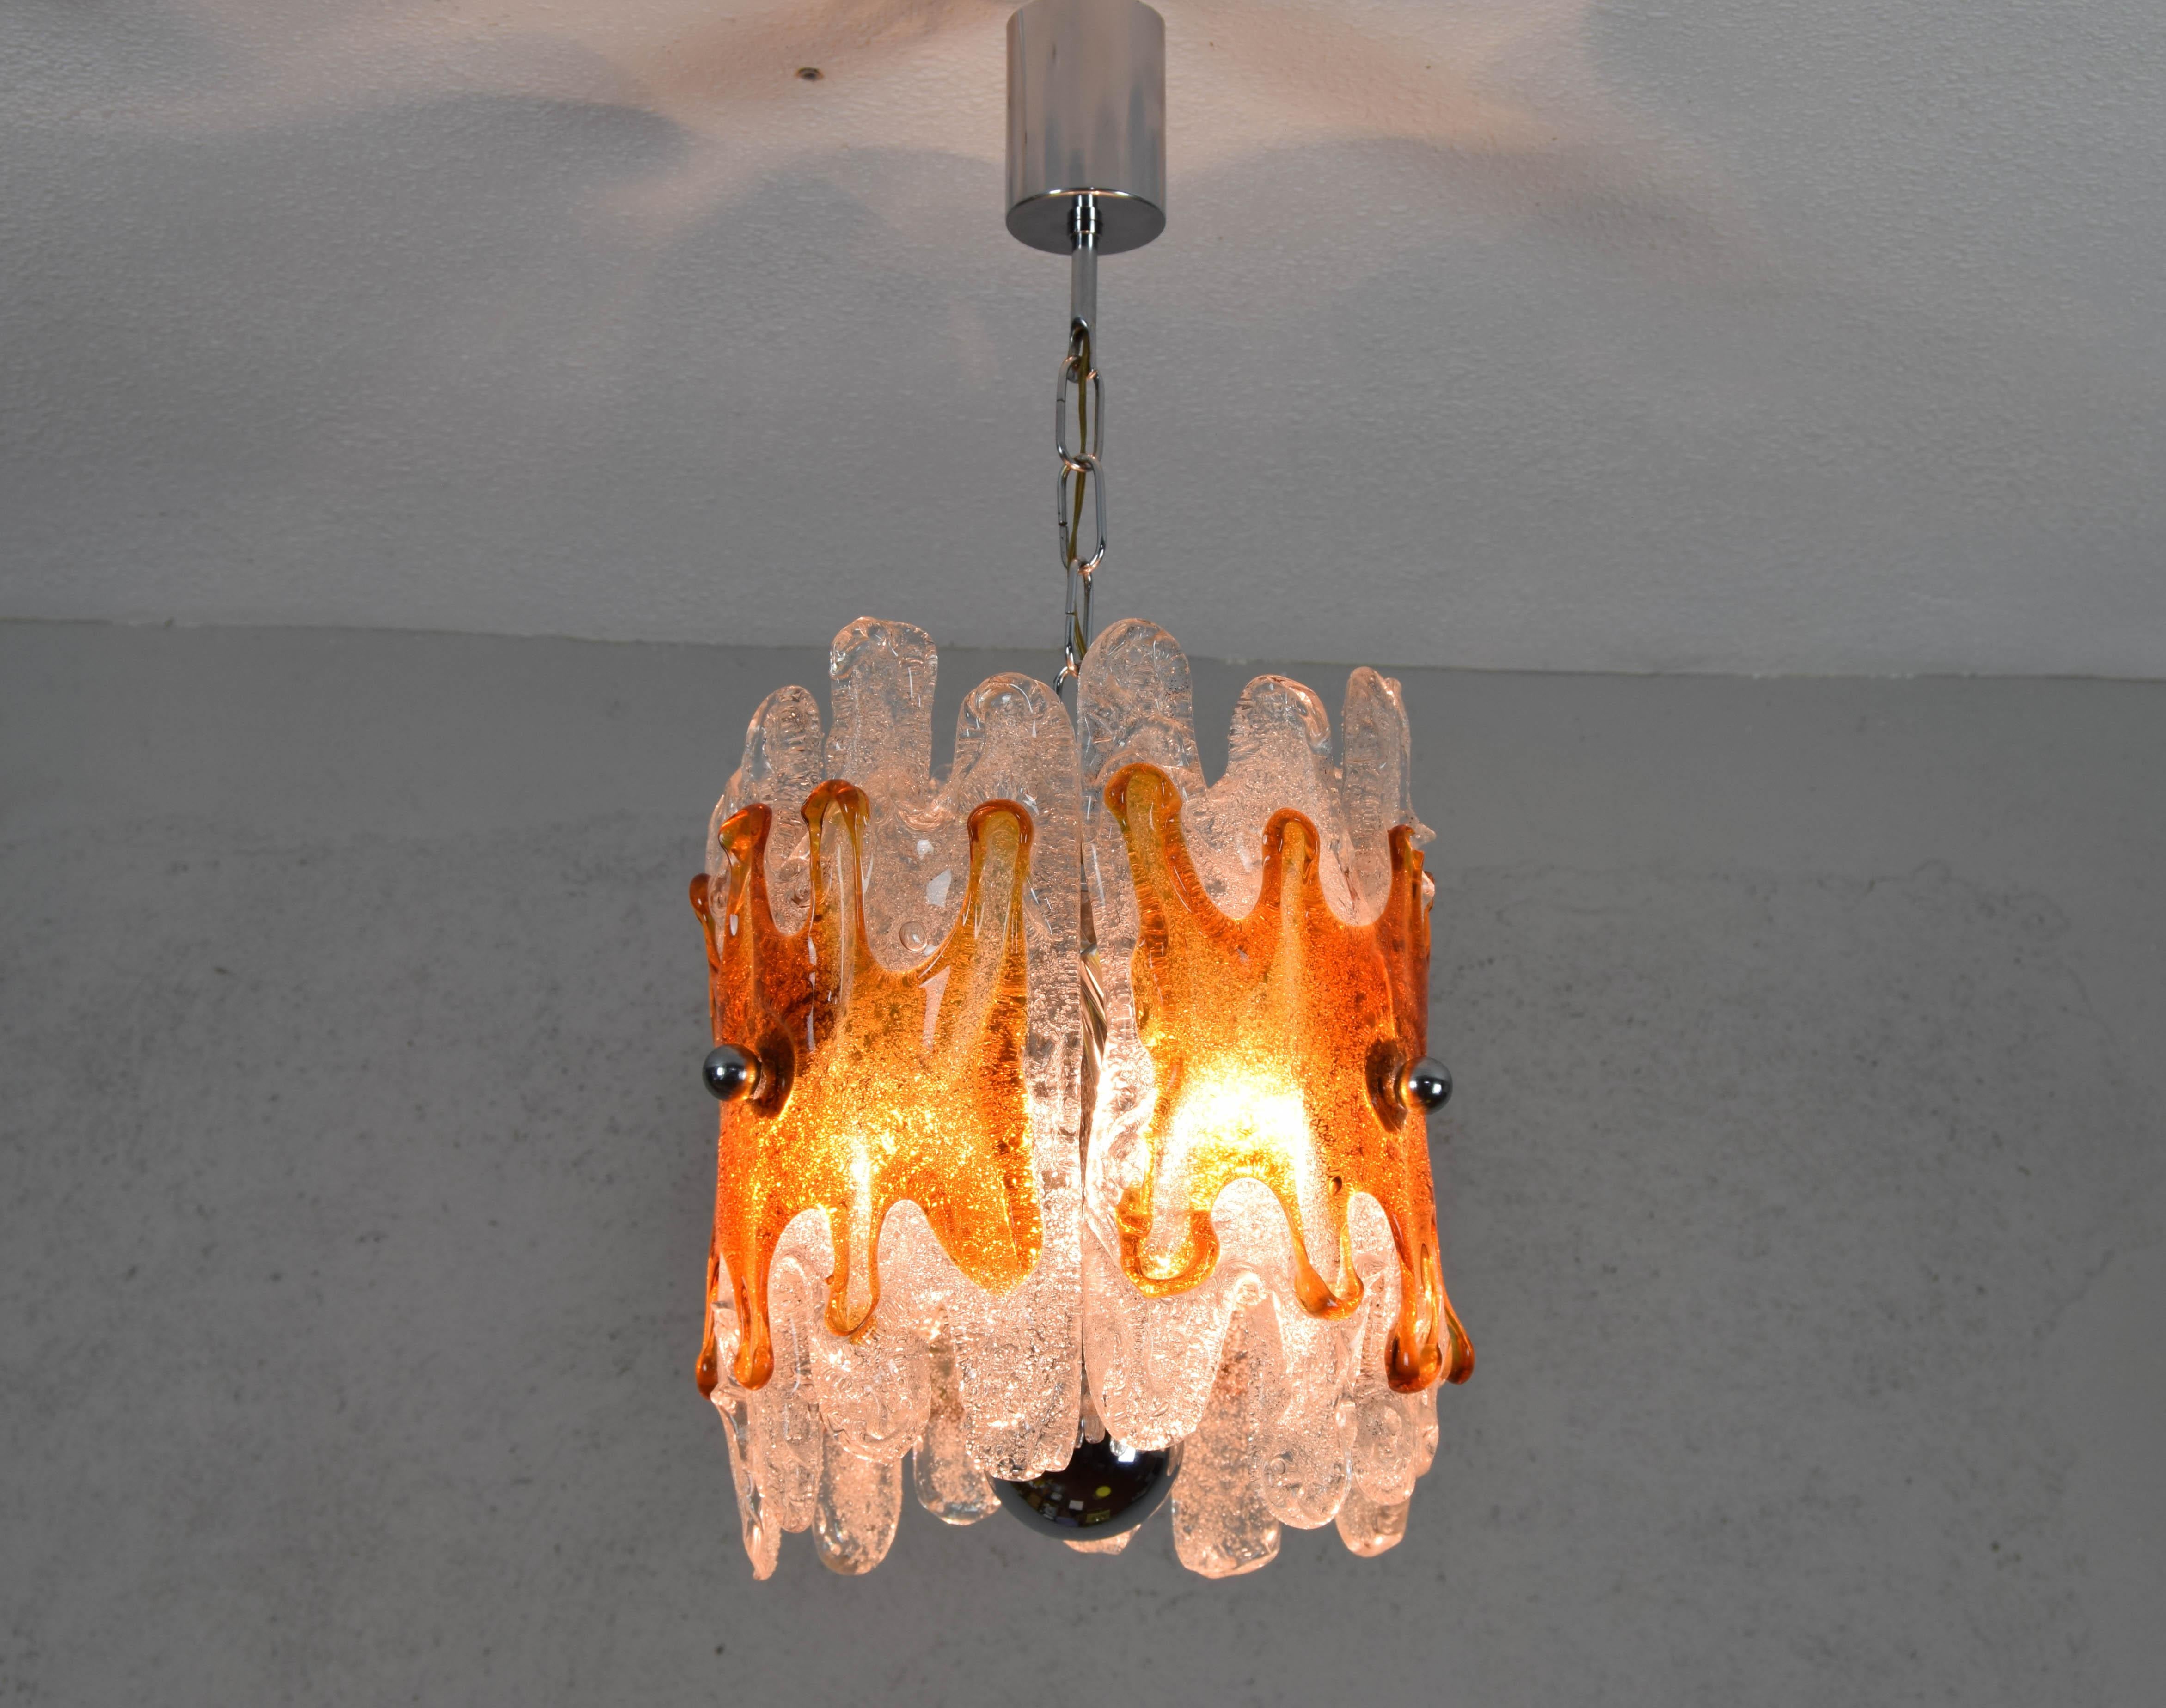 Midcentury Italian Modern Mazzega Amber and Clear Lava Murano Chandelier, 1960s For Sale 2